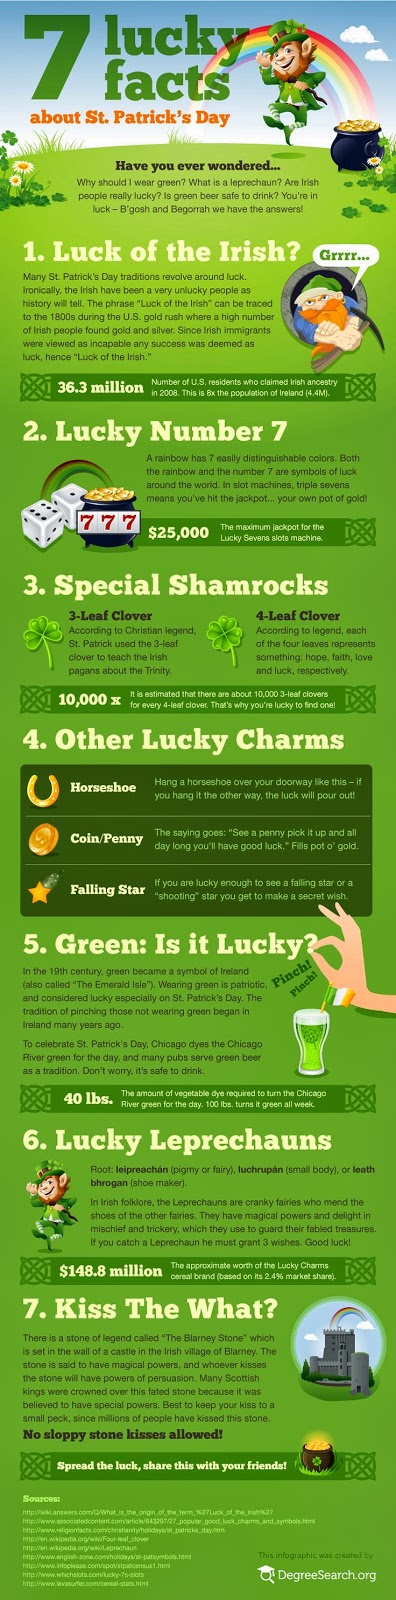 http://degreesearch.org/blog/7-lucky-facts-about-st-patricks-day/